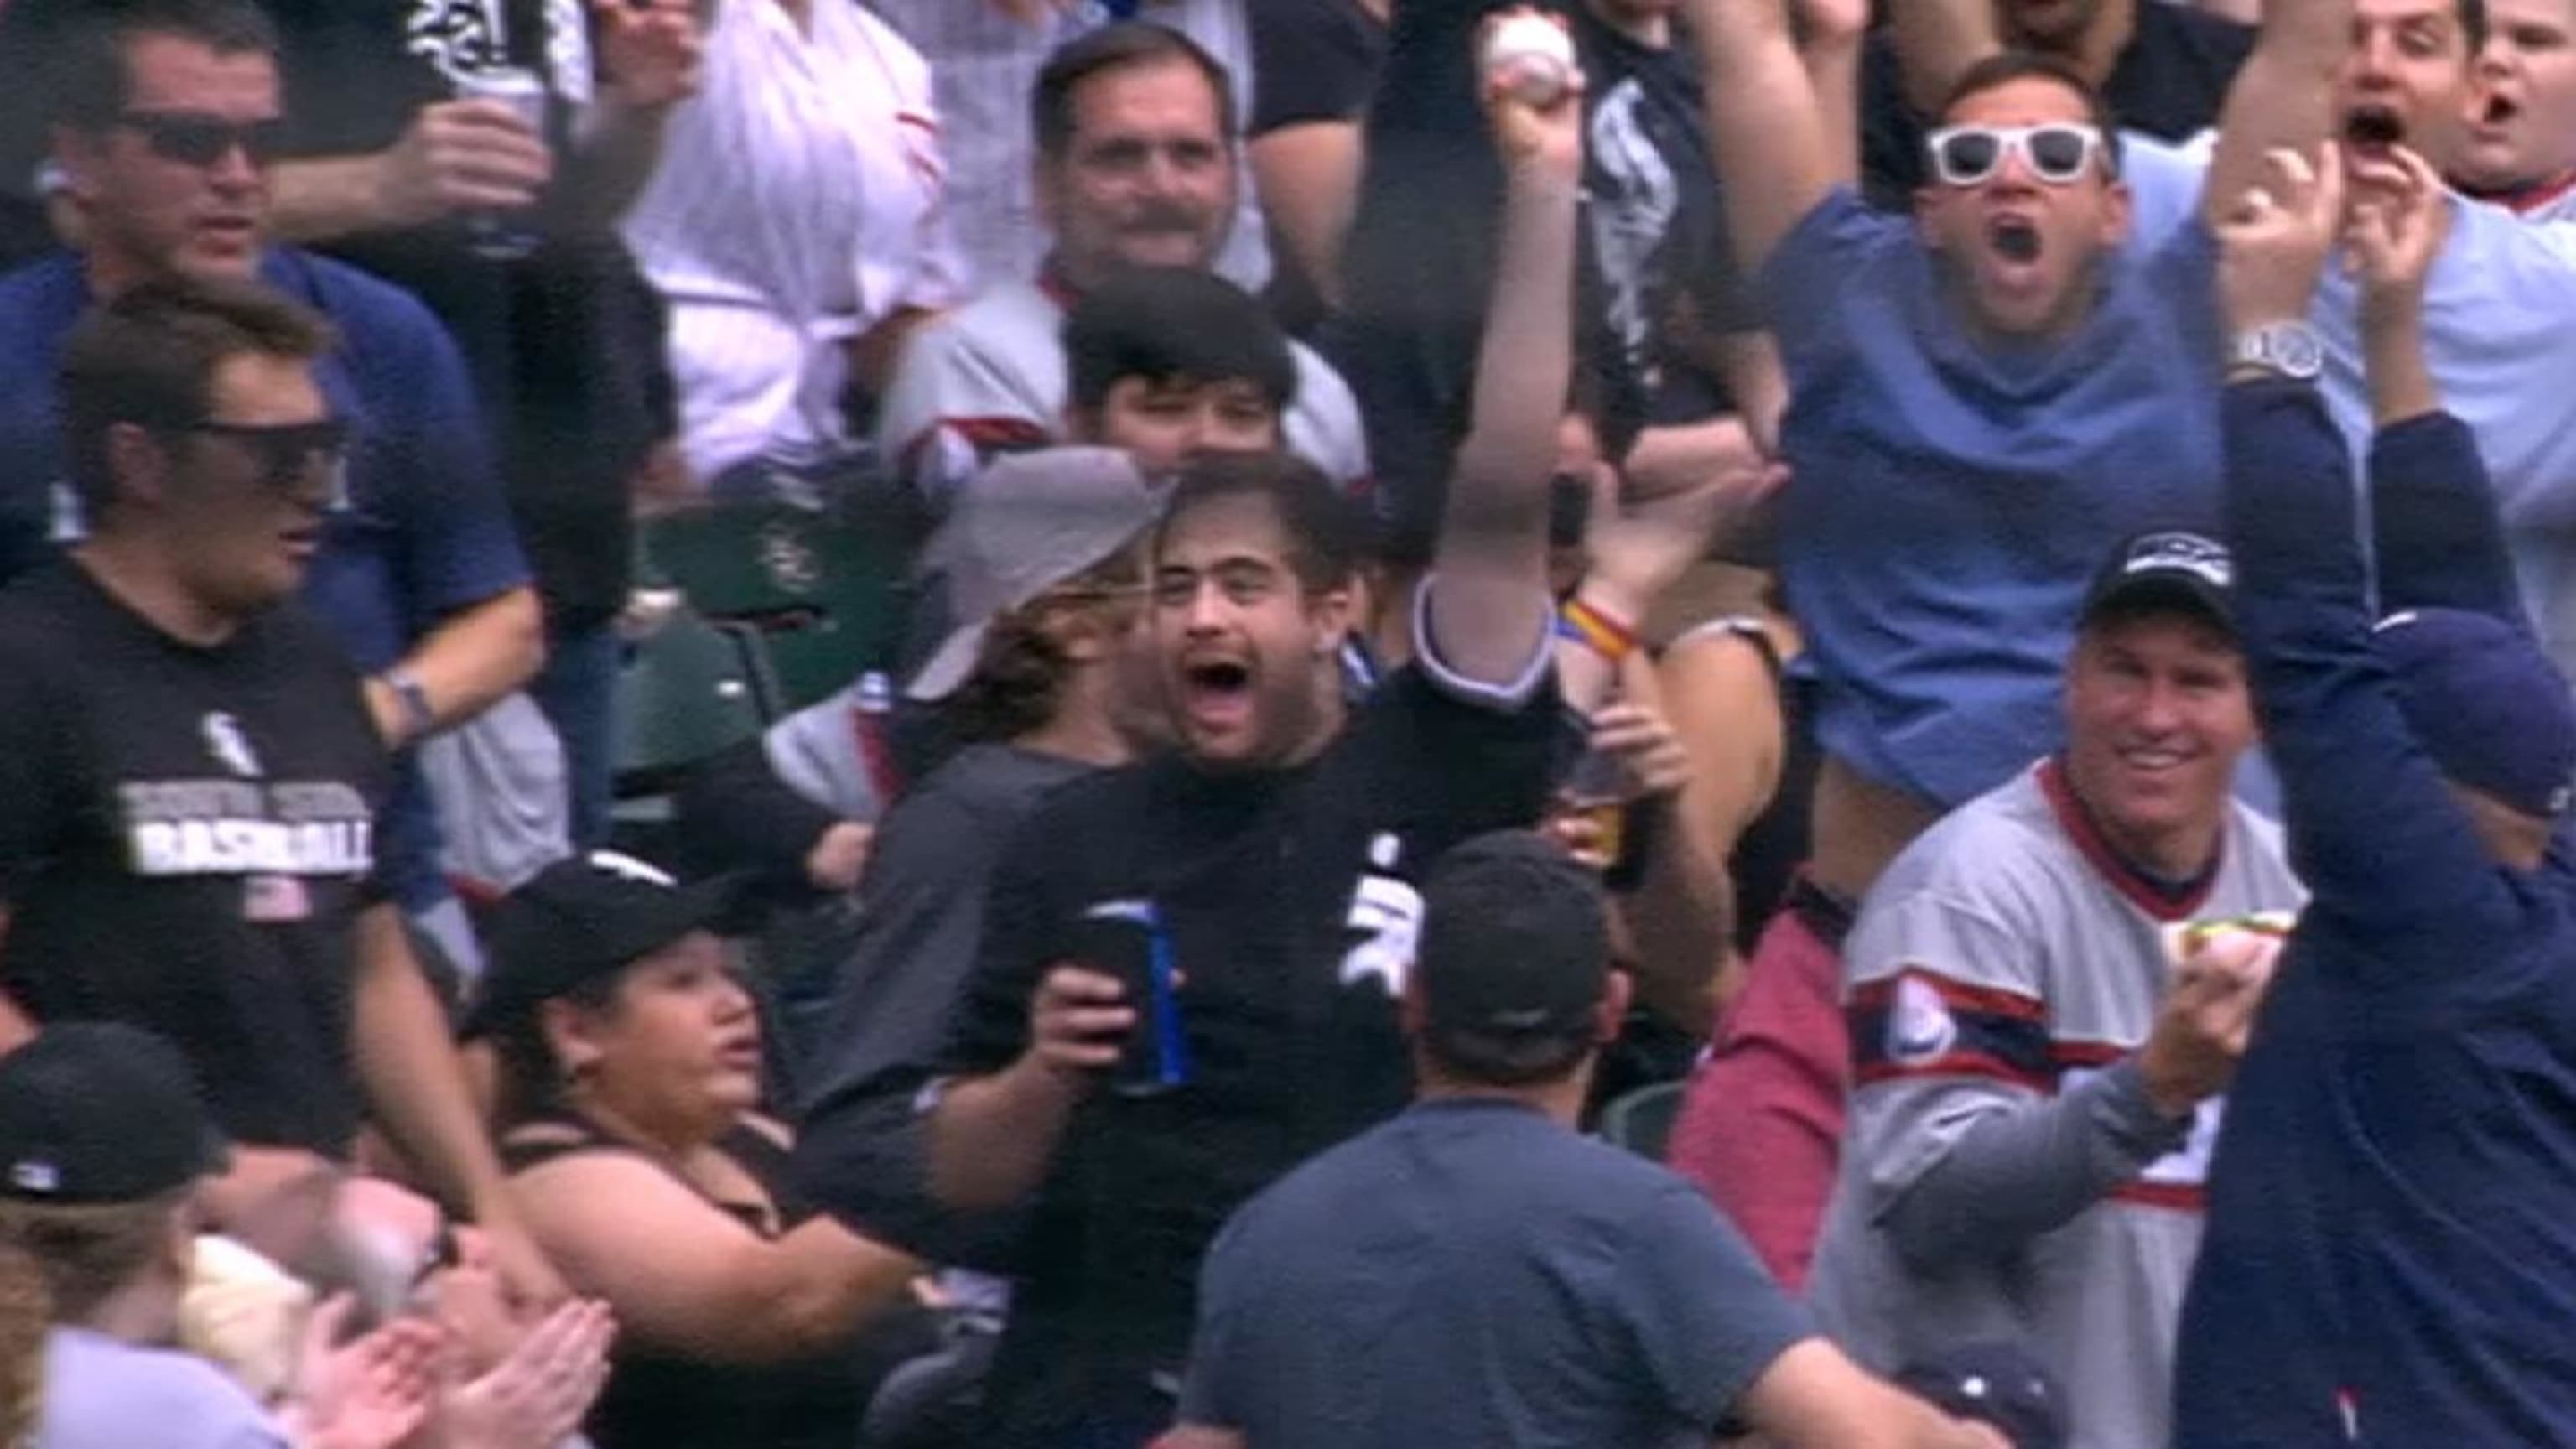 Thoroughly embracing the moment, this White Sox fan barehanded a